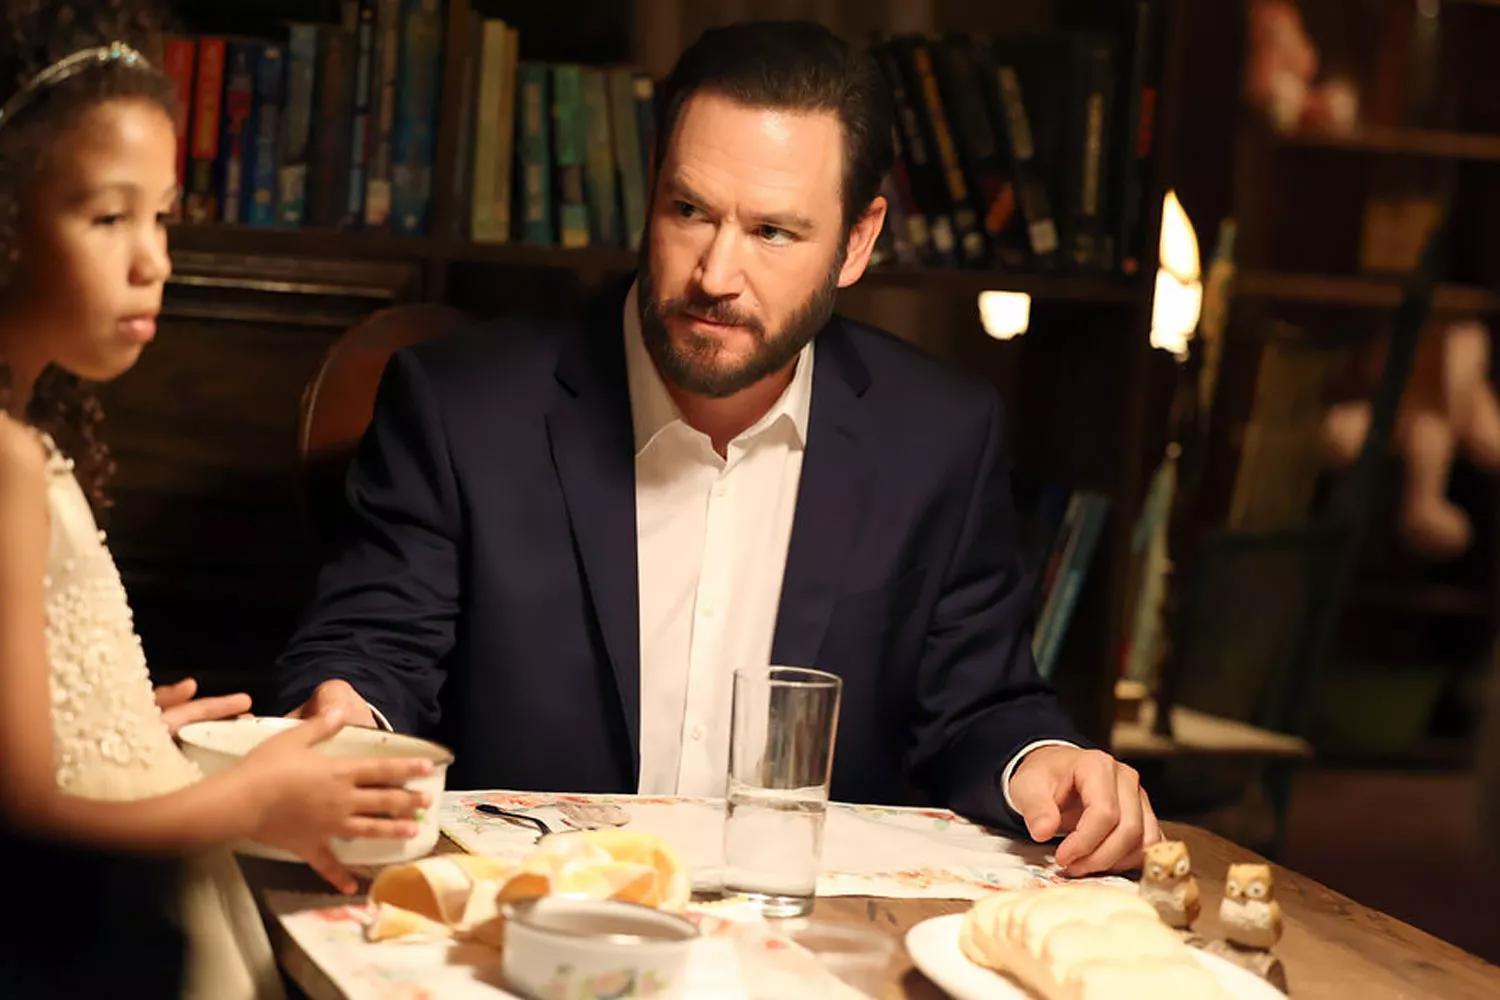 NBC's 'Found': The Chilling Tale of Missing Voices and Dark Secrets with Mark-Paul Gosselaar